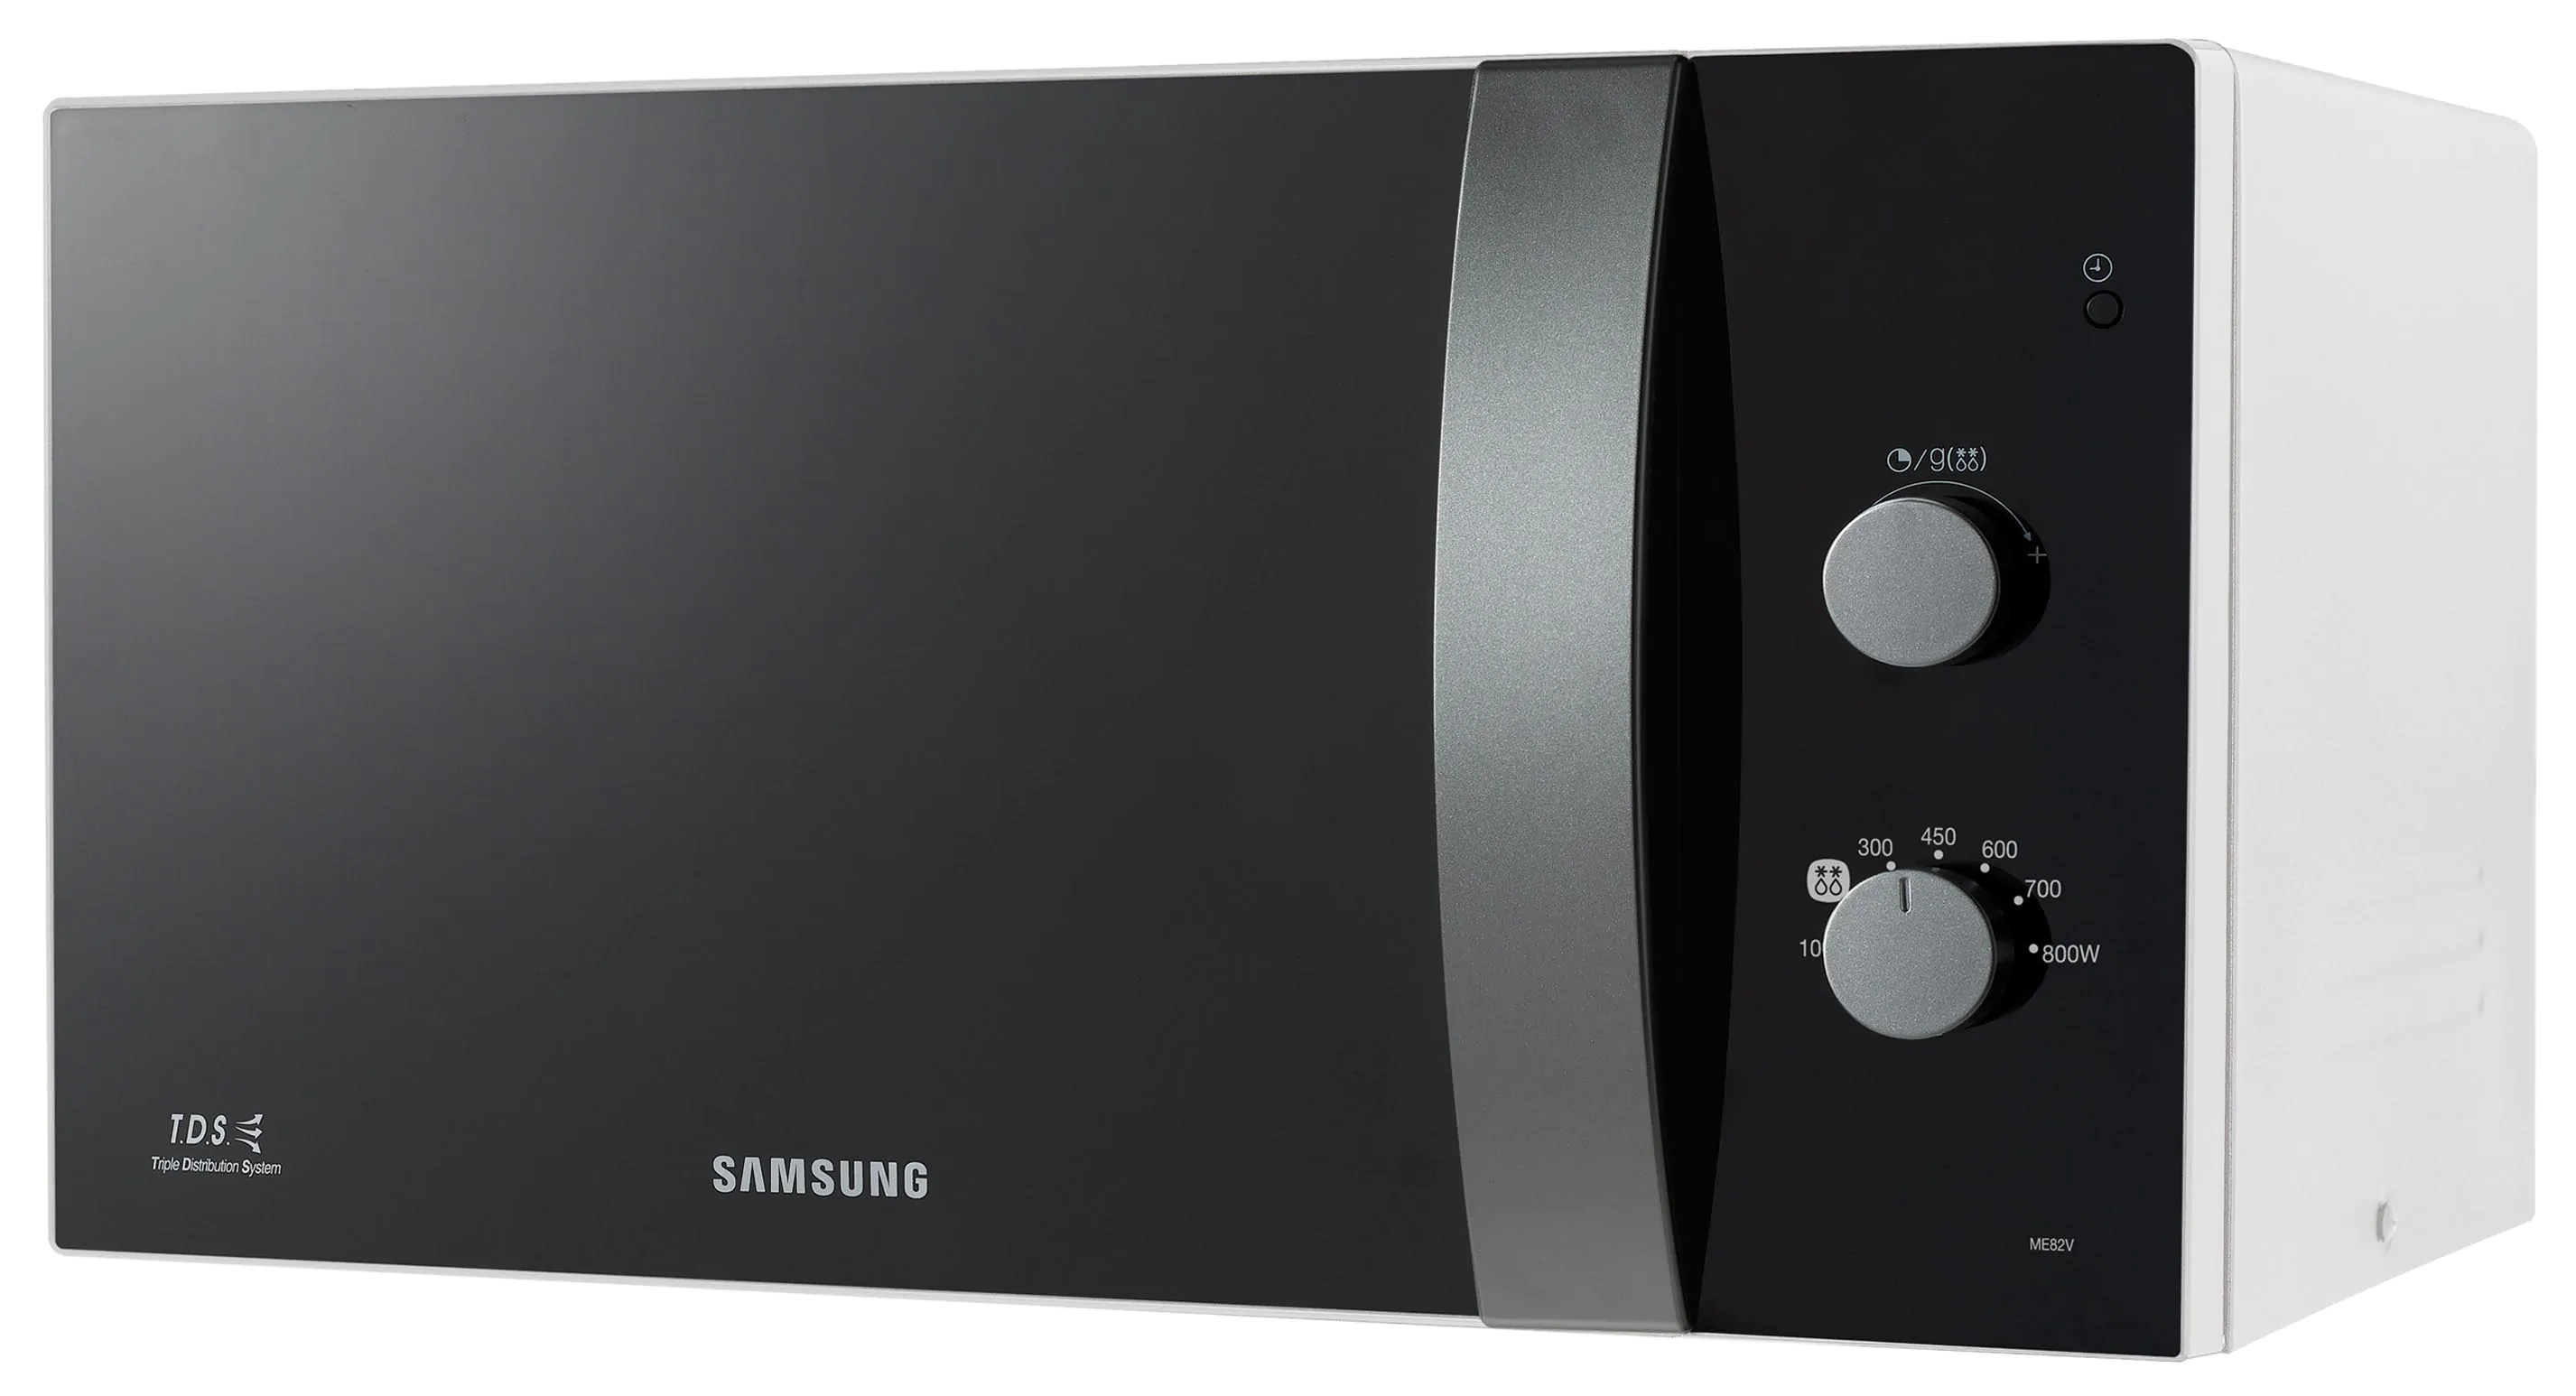 Forno a microonde Samsung